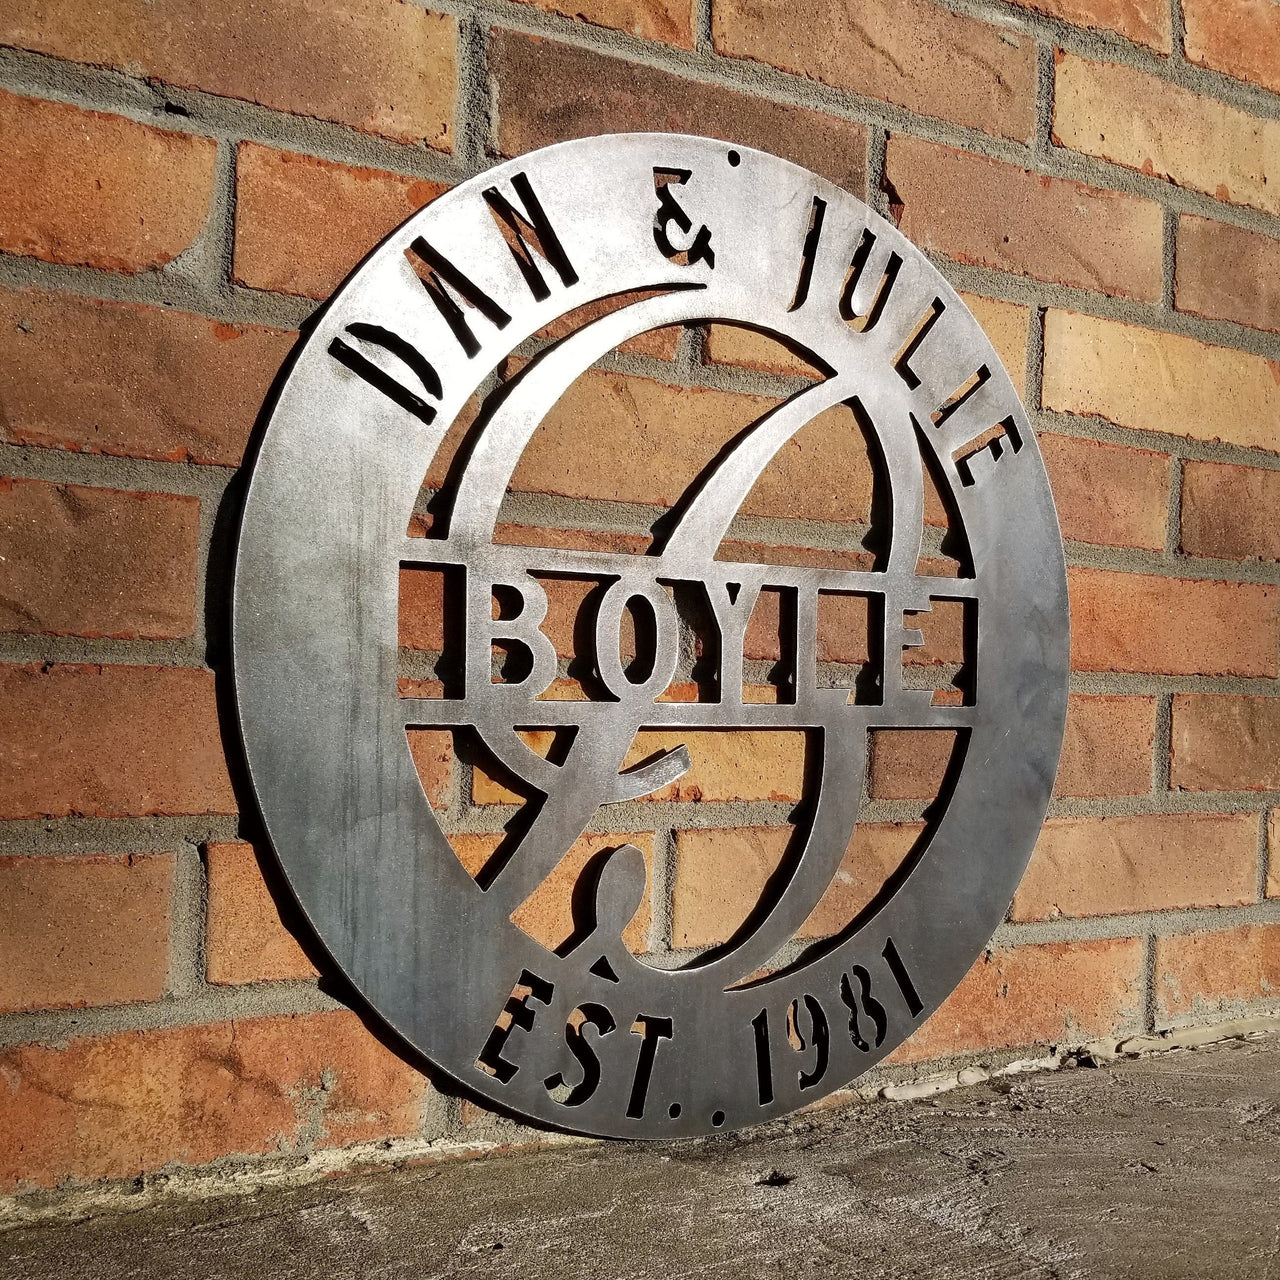 This is a round metal wedding monogram with 1/4"holes for hanging that reads, " Dan & Julie, Boyle, Established 1981"